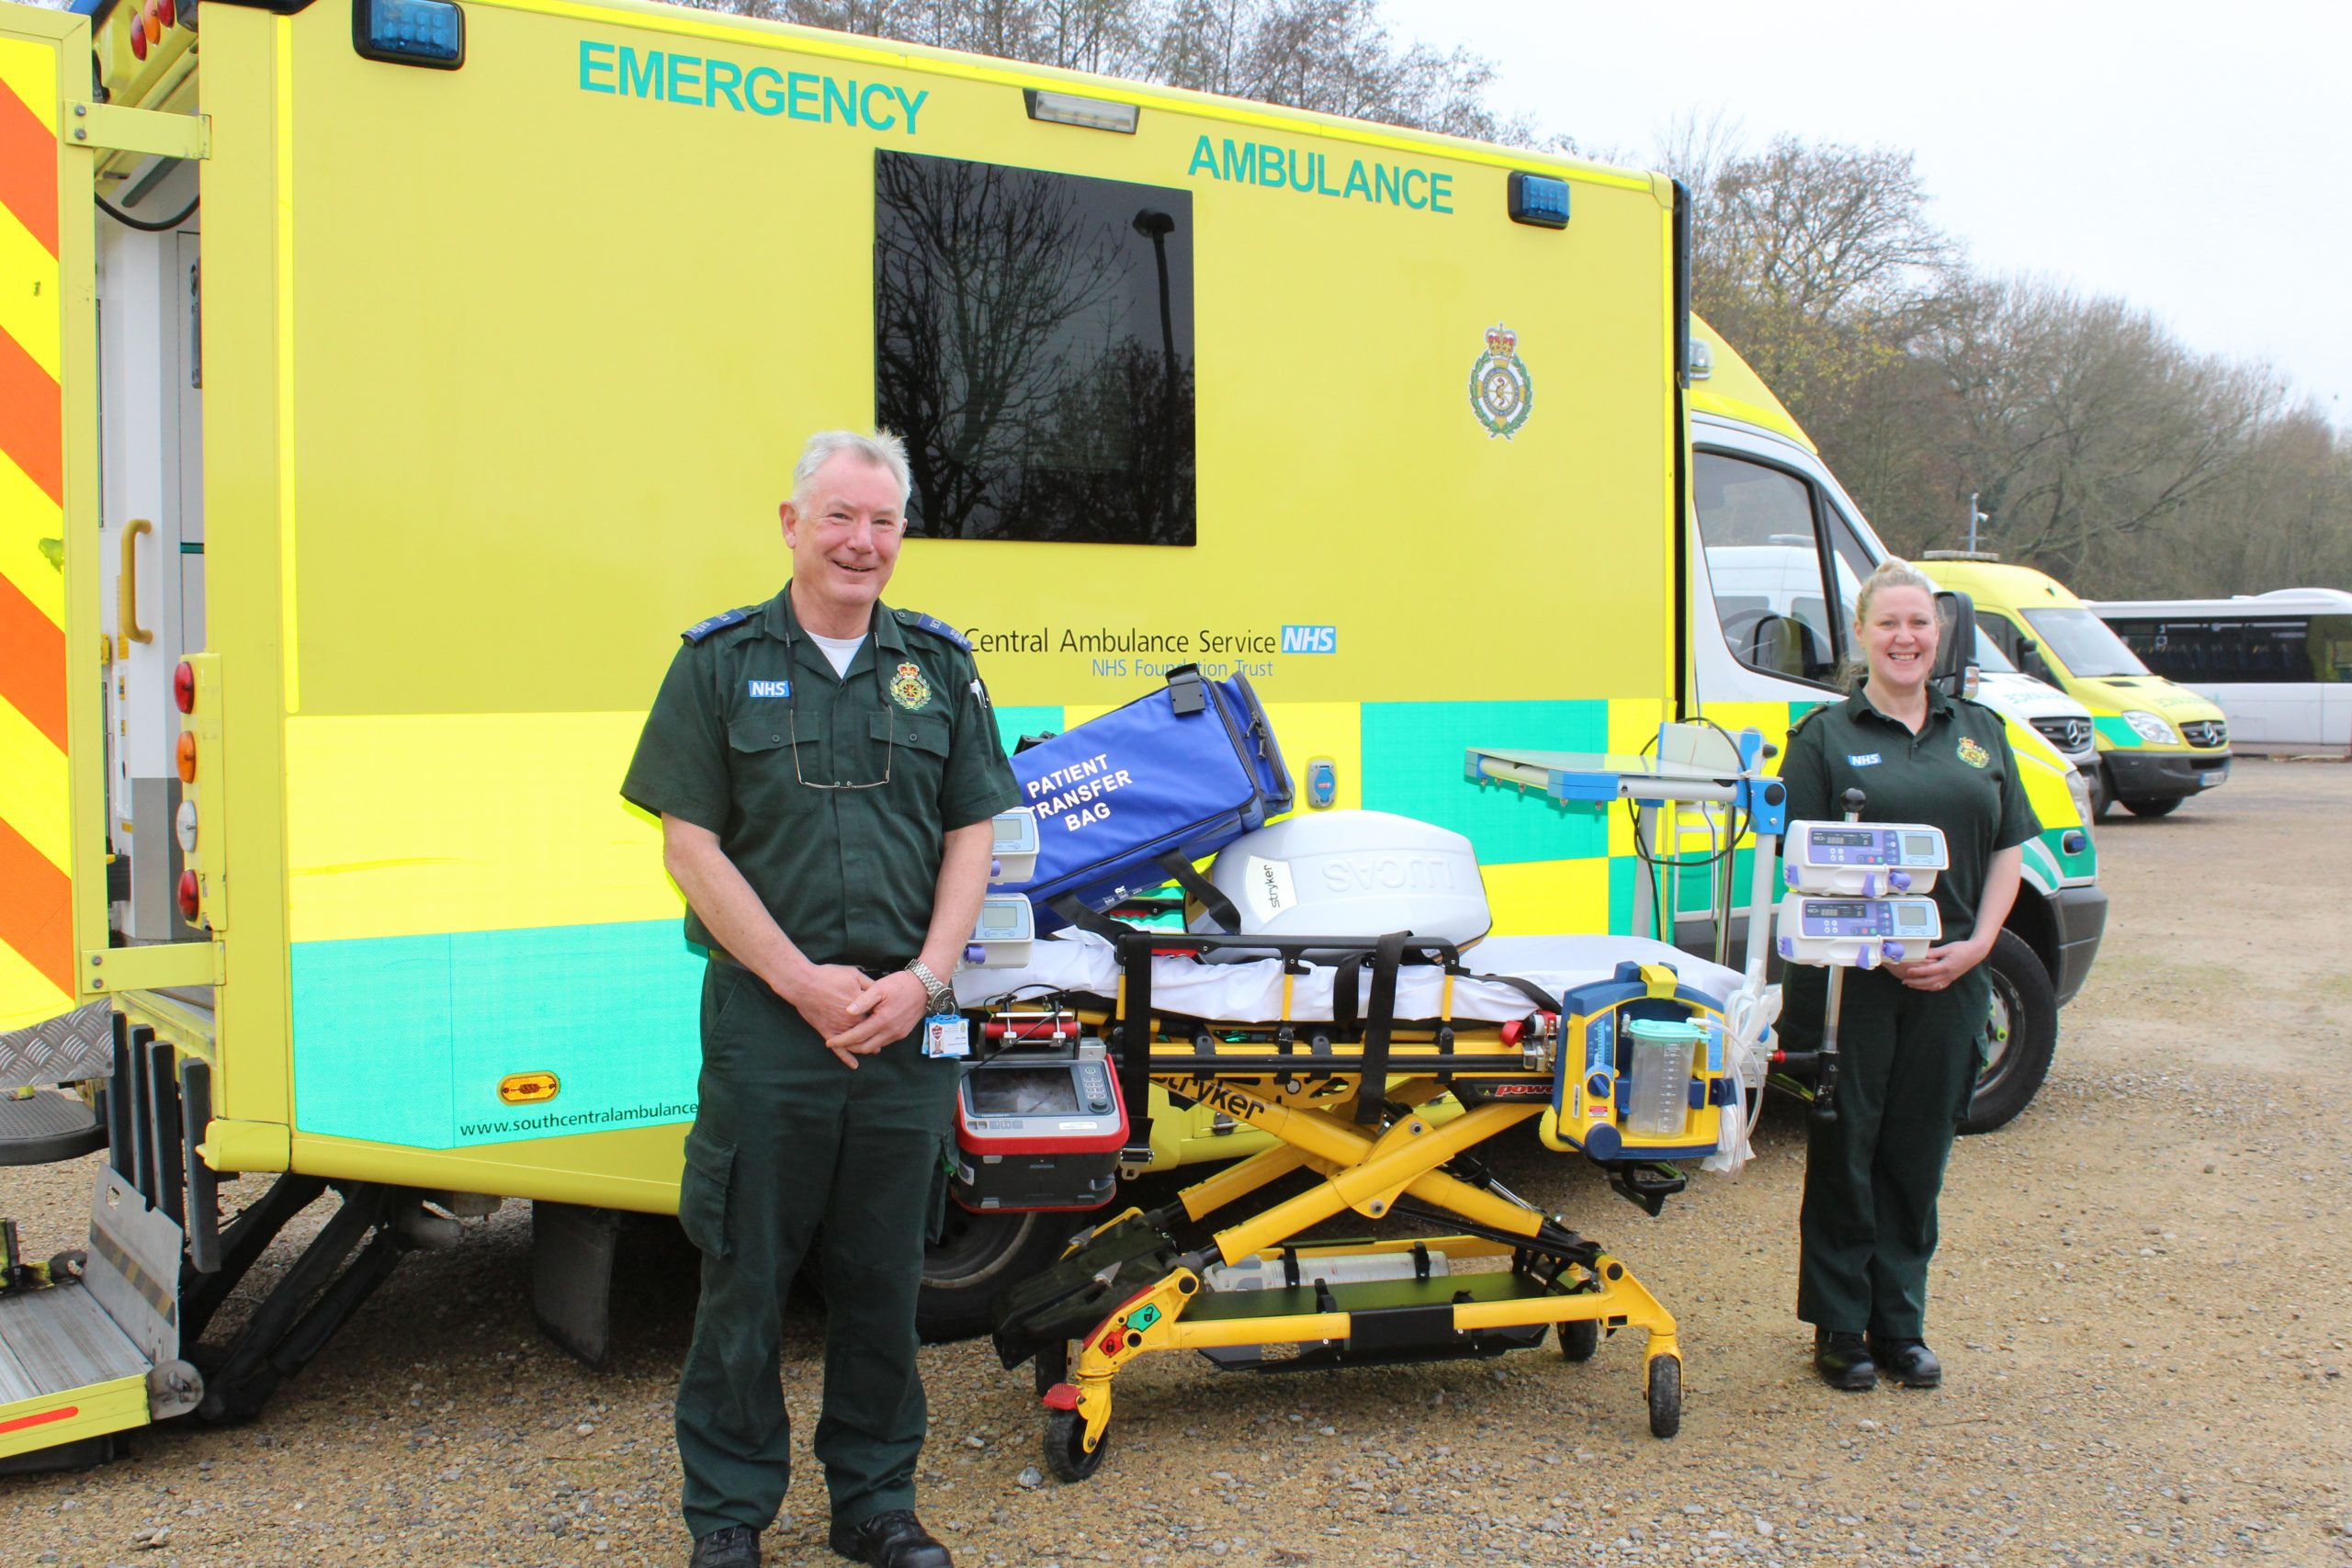 Am ambulance crew and critical care transfer bed standing in front of an ambulance